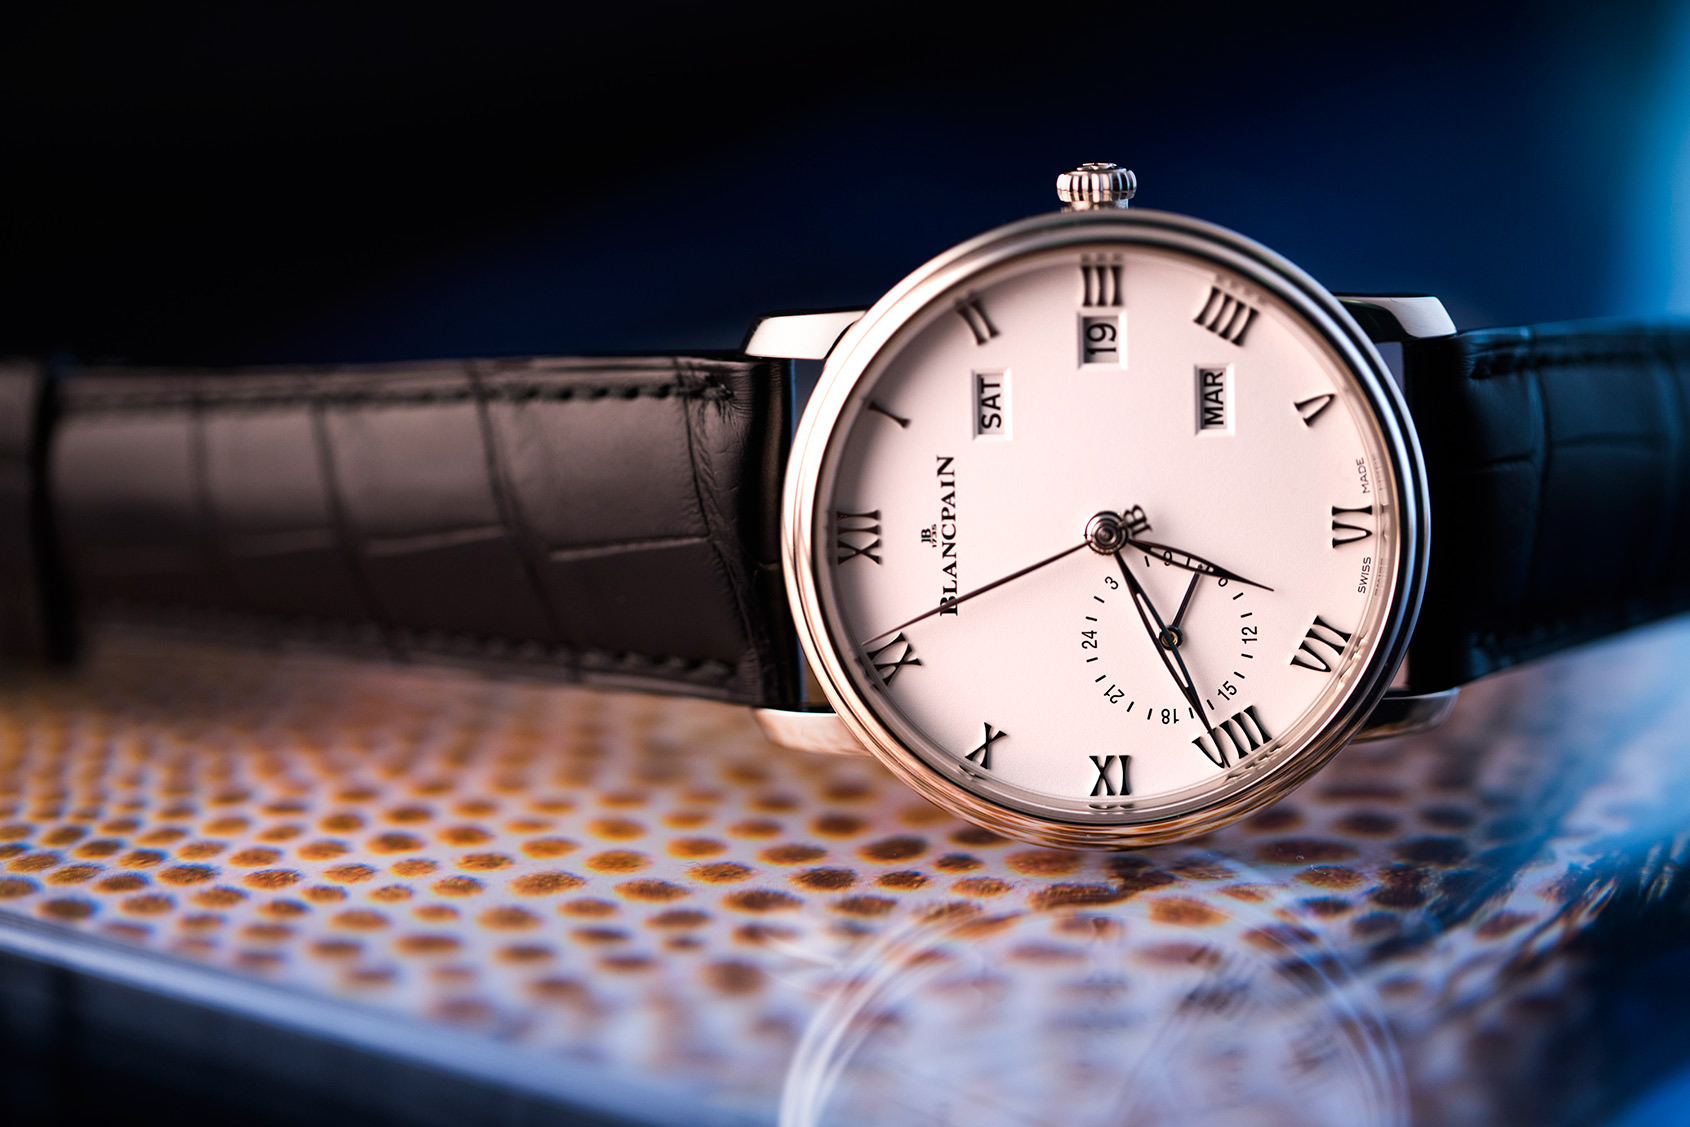 Blancpain Villeret Annual Calendar with GMT Hands on Review